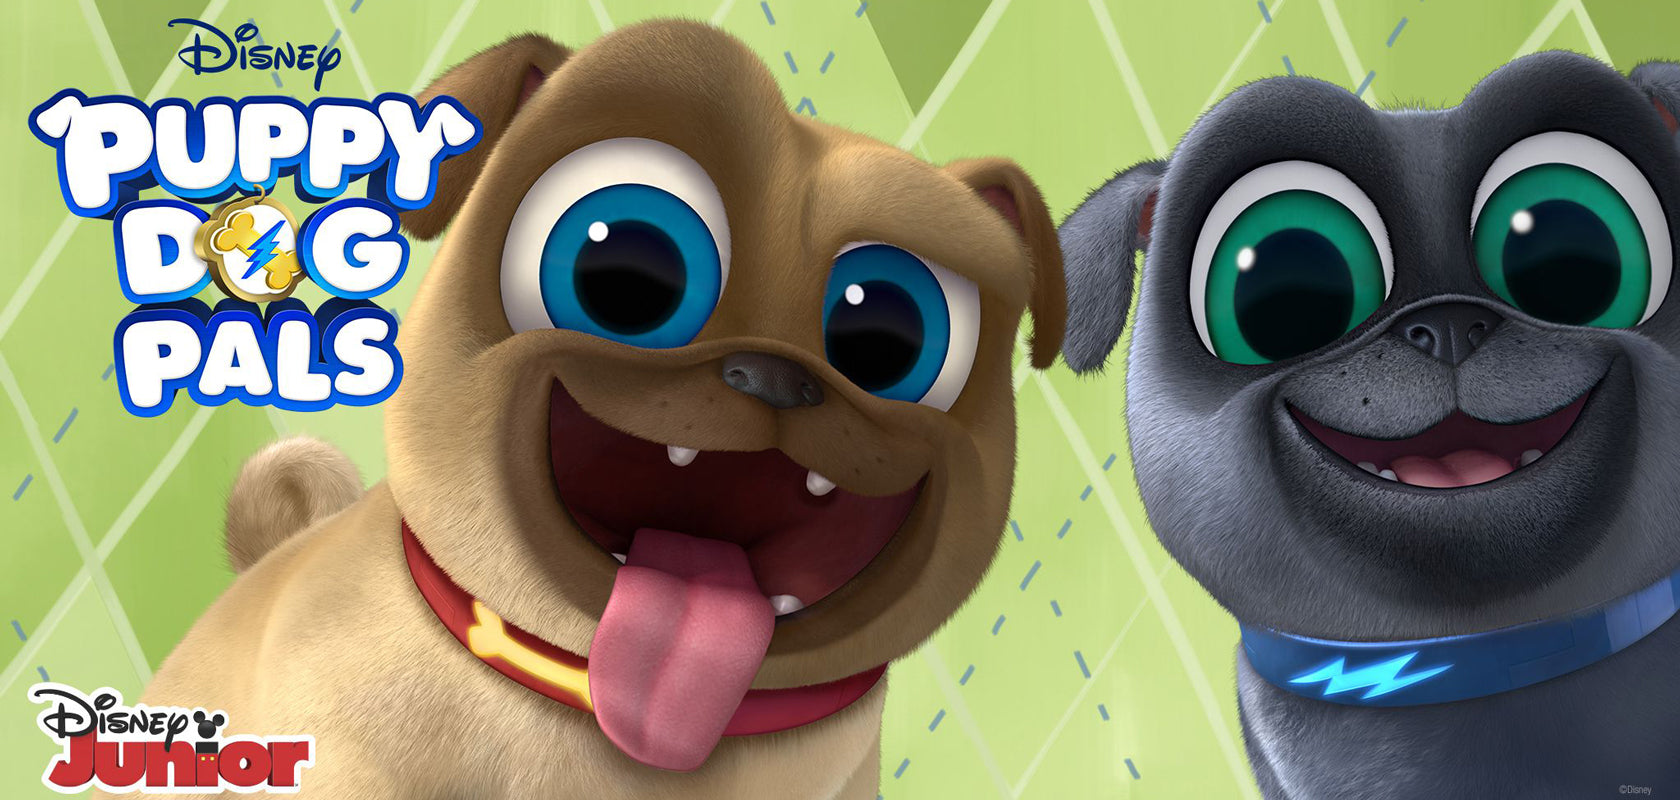 what kind of dog is puppy dog pals